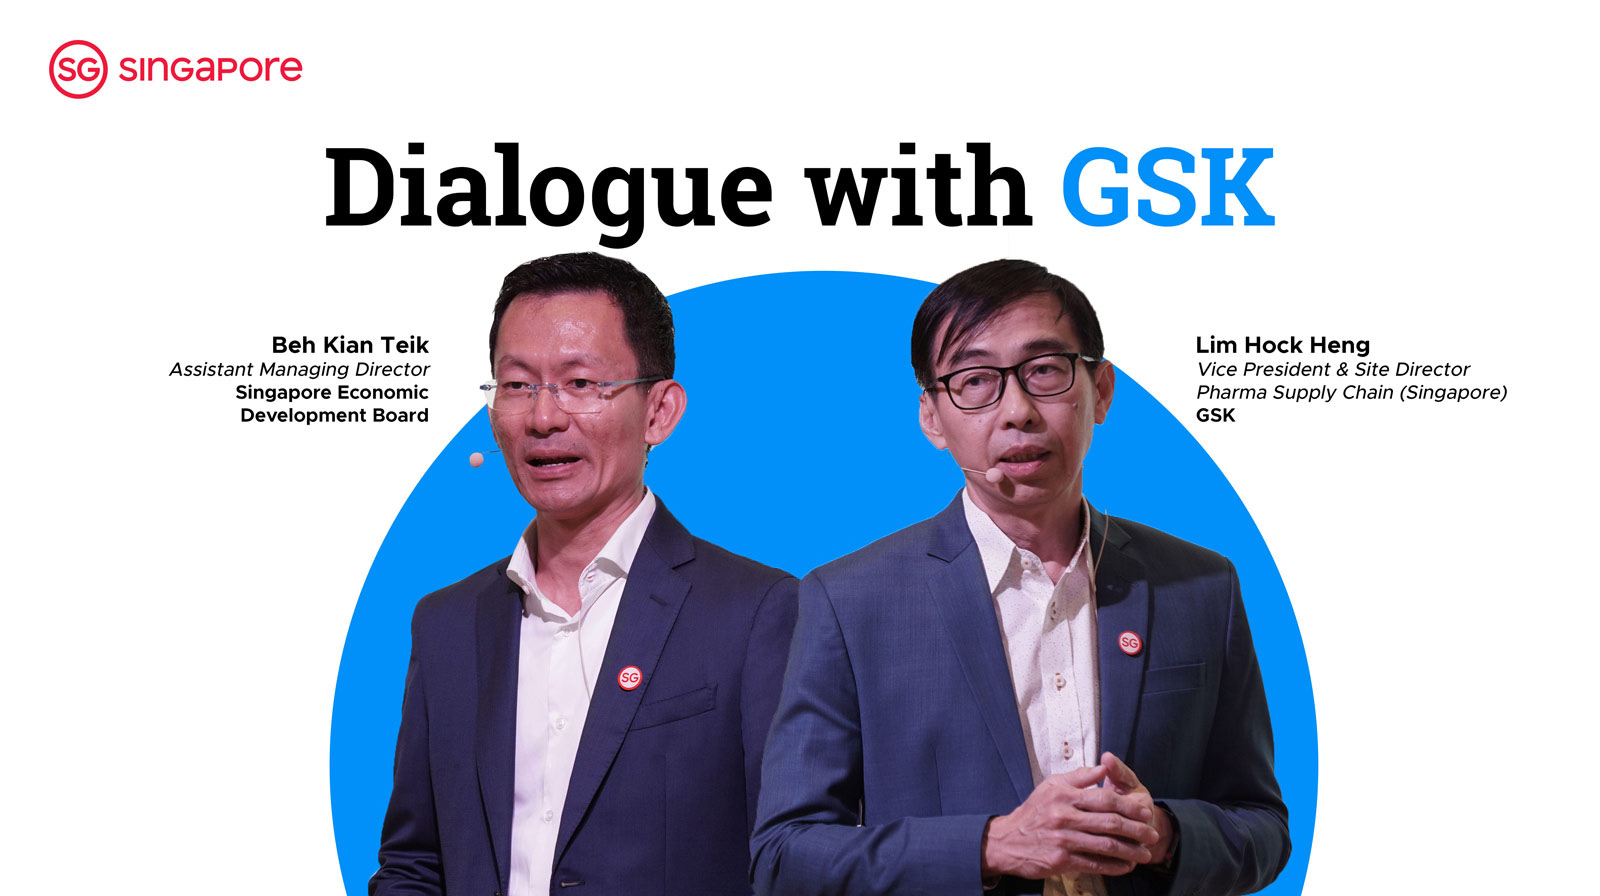 Dialogue with GSK